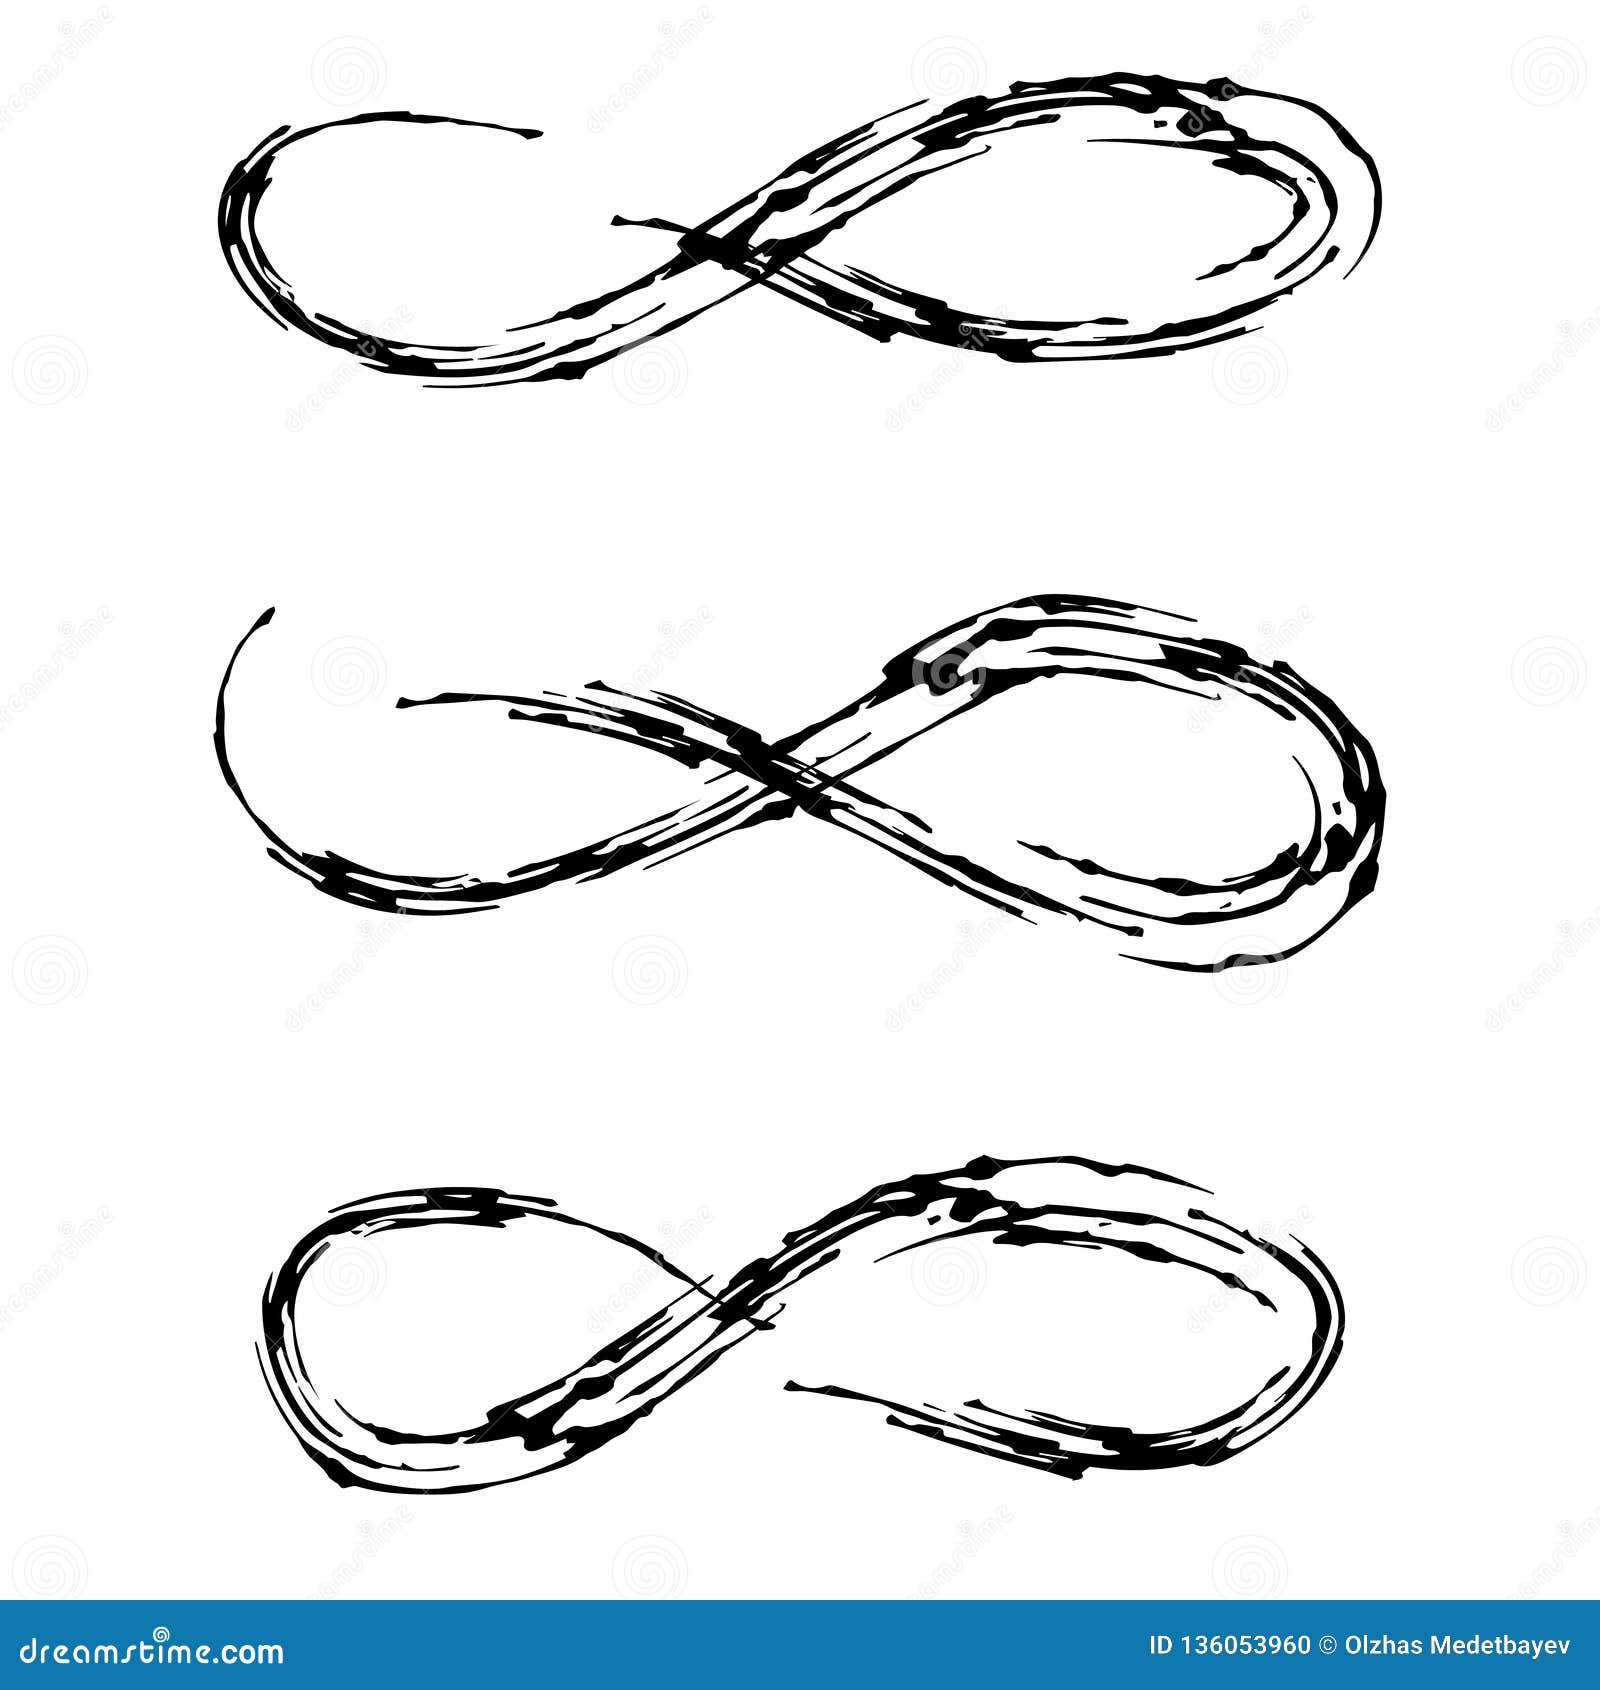 Creative Abstract Vector Set of Three Infinity Signs. Stock ...